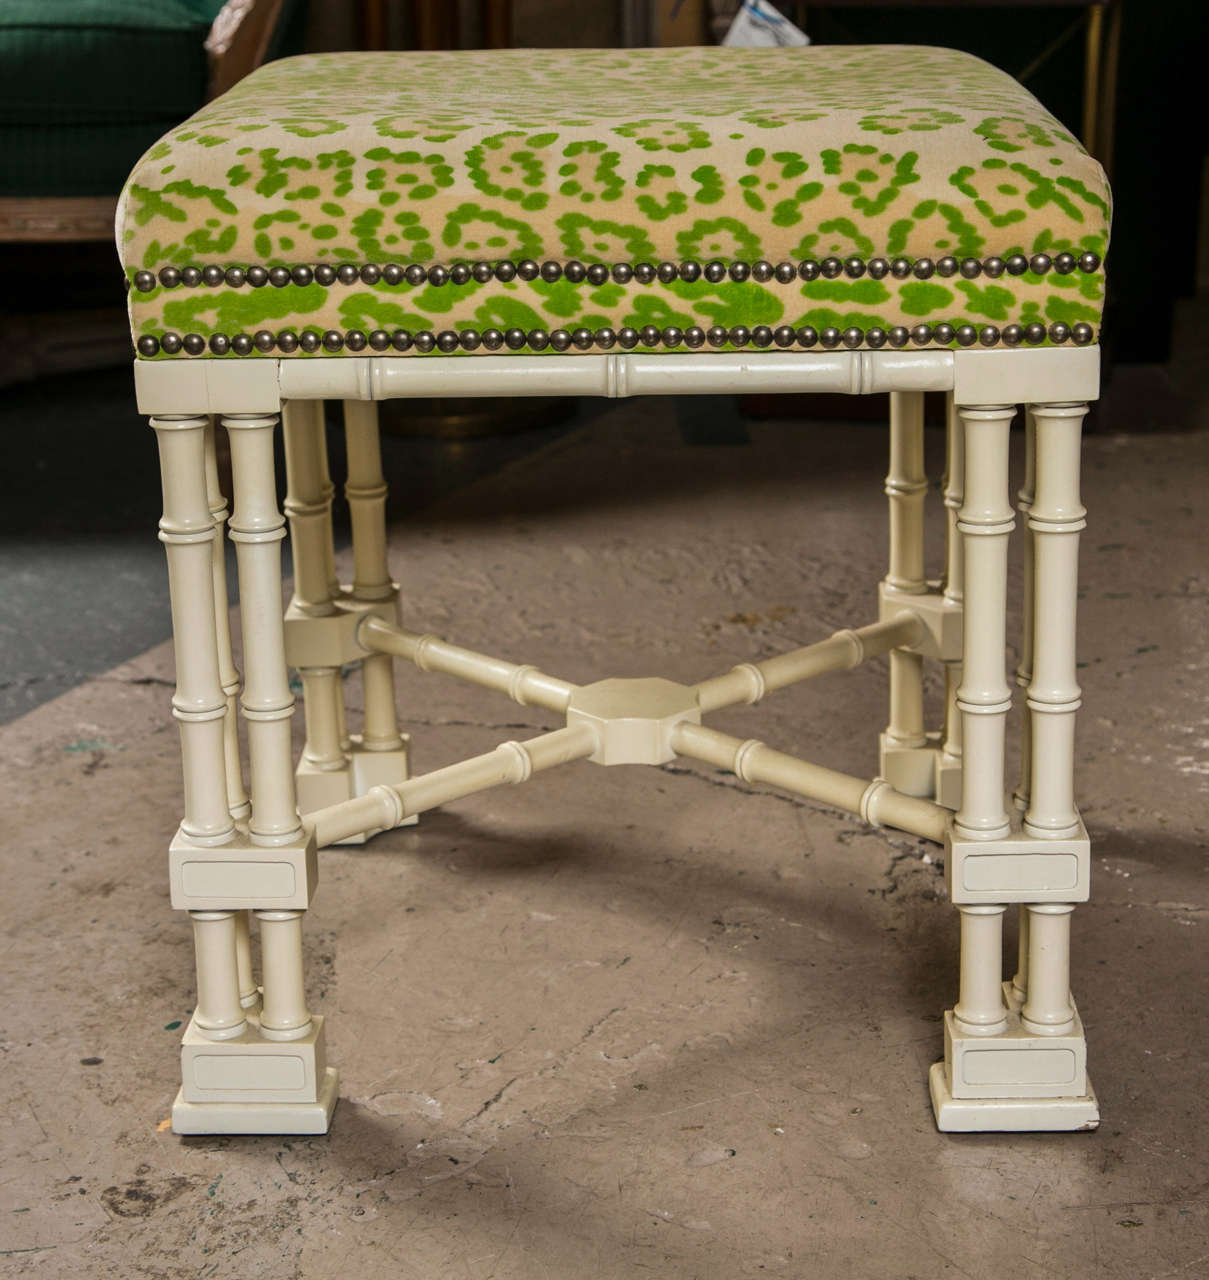 Pair of stools on Hollywood Regency style, circa 1970s, the green/yellow patterned seat with nail heads supported on white painted faux bamboo base, joint by an X stretcher.